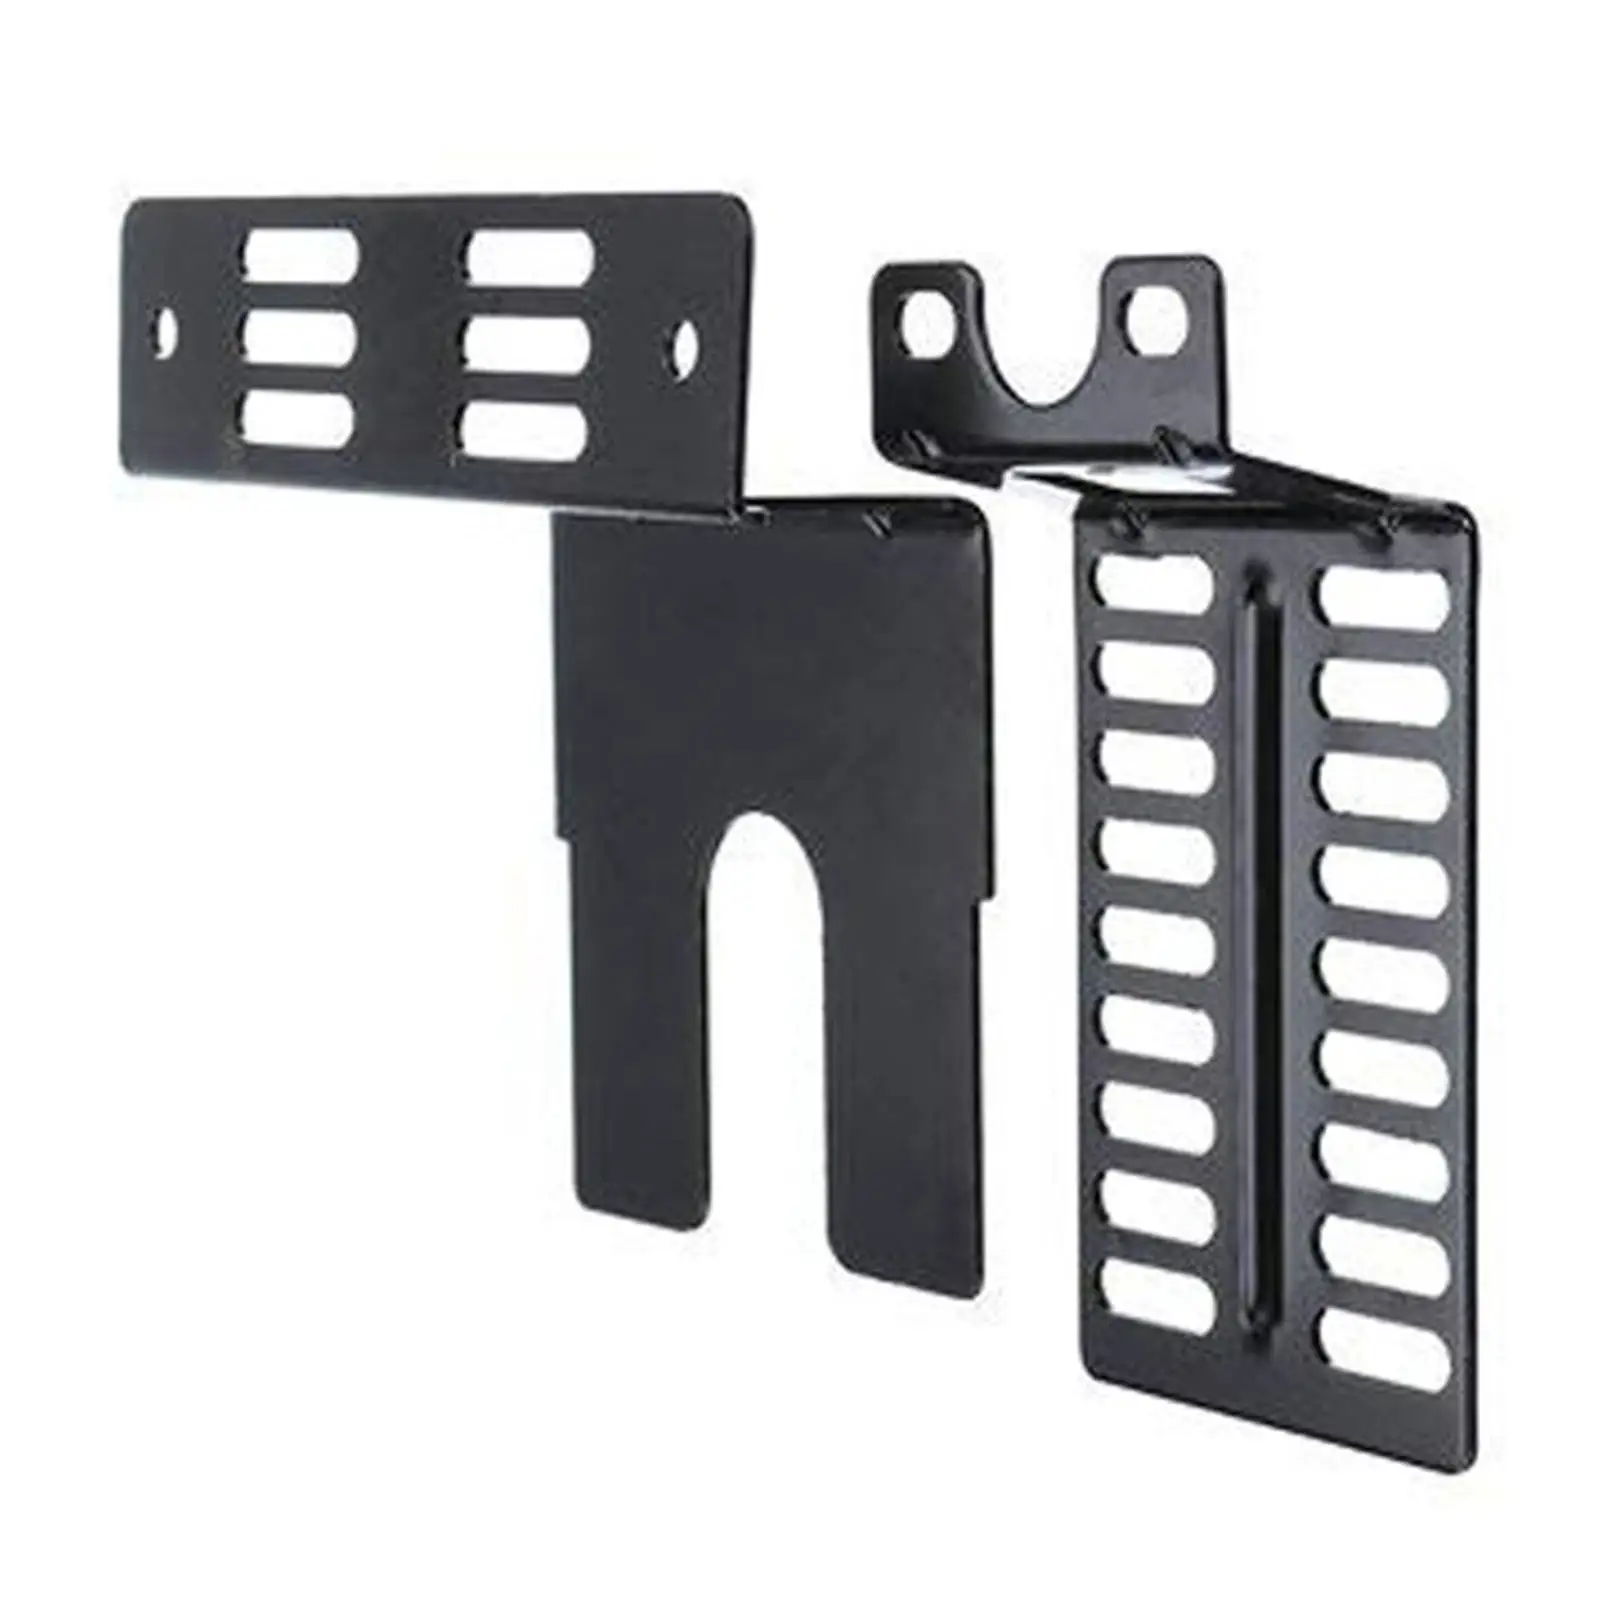 2Pcs Electric Grill Motor Bracket Accessory Support Easy to Install with Screws Rotisserie Rod Rack for Patio Outdoor Camping